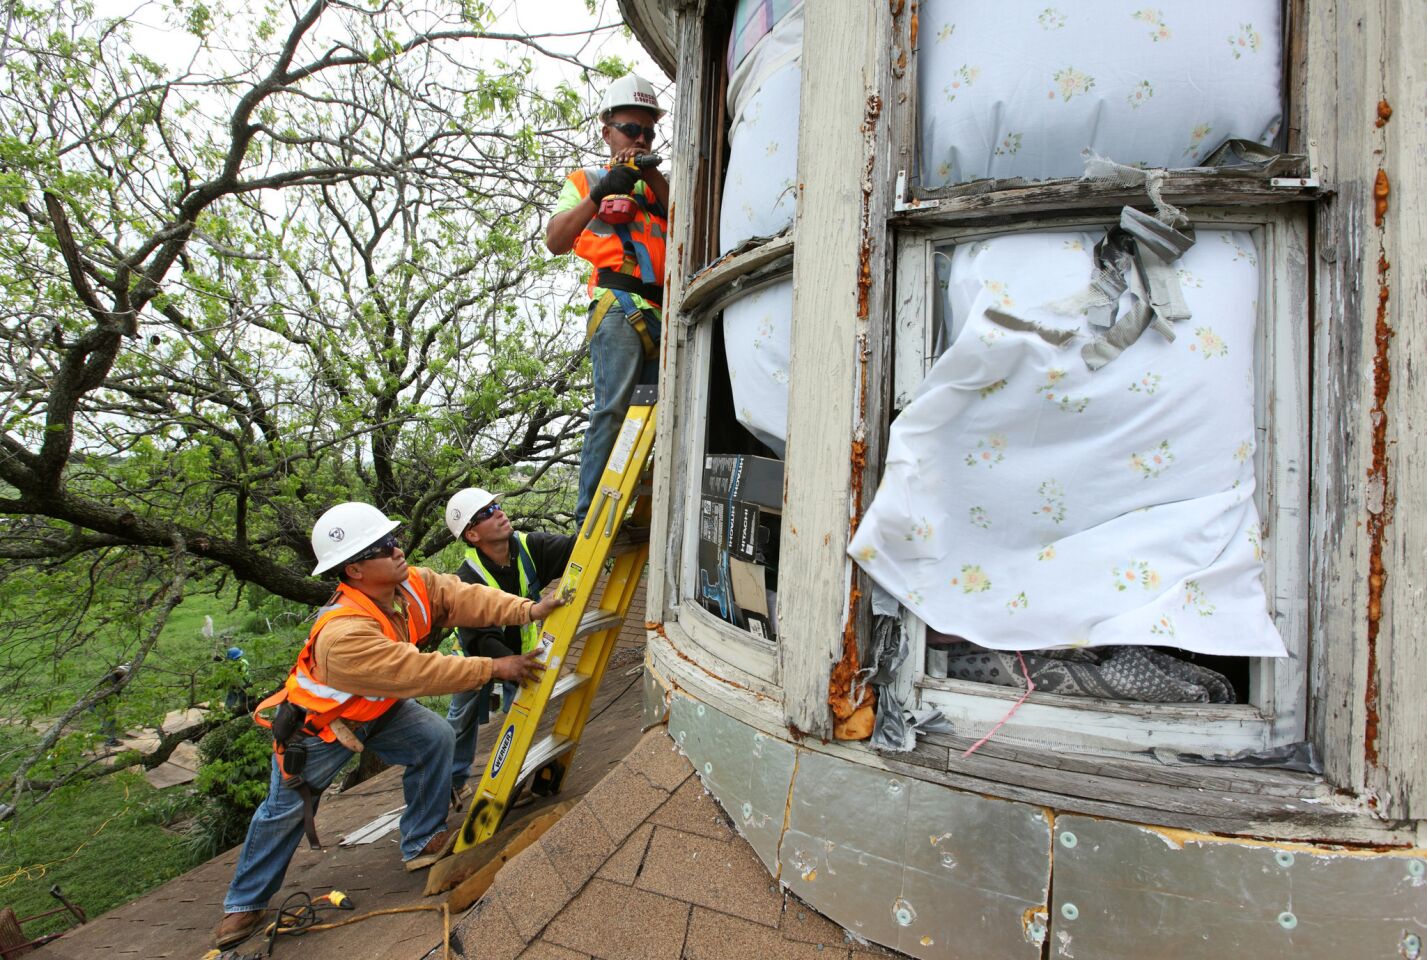 Workers board up windows of a home near the site of the fertilizer plant explosion in West, Texas.